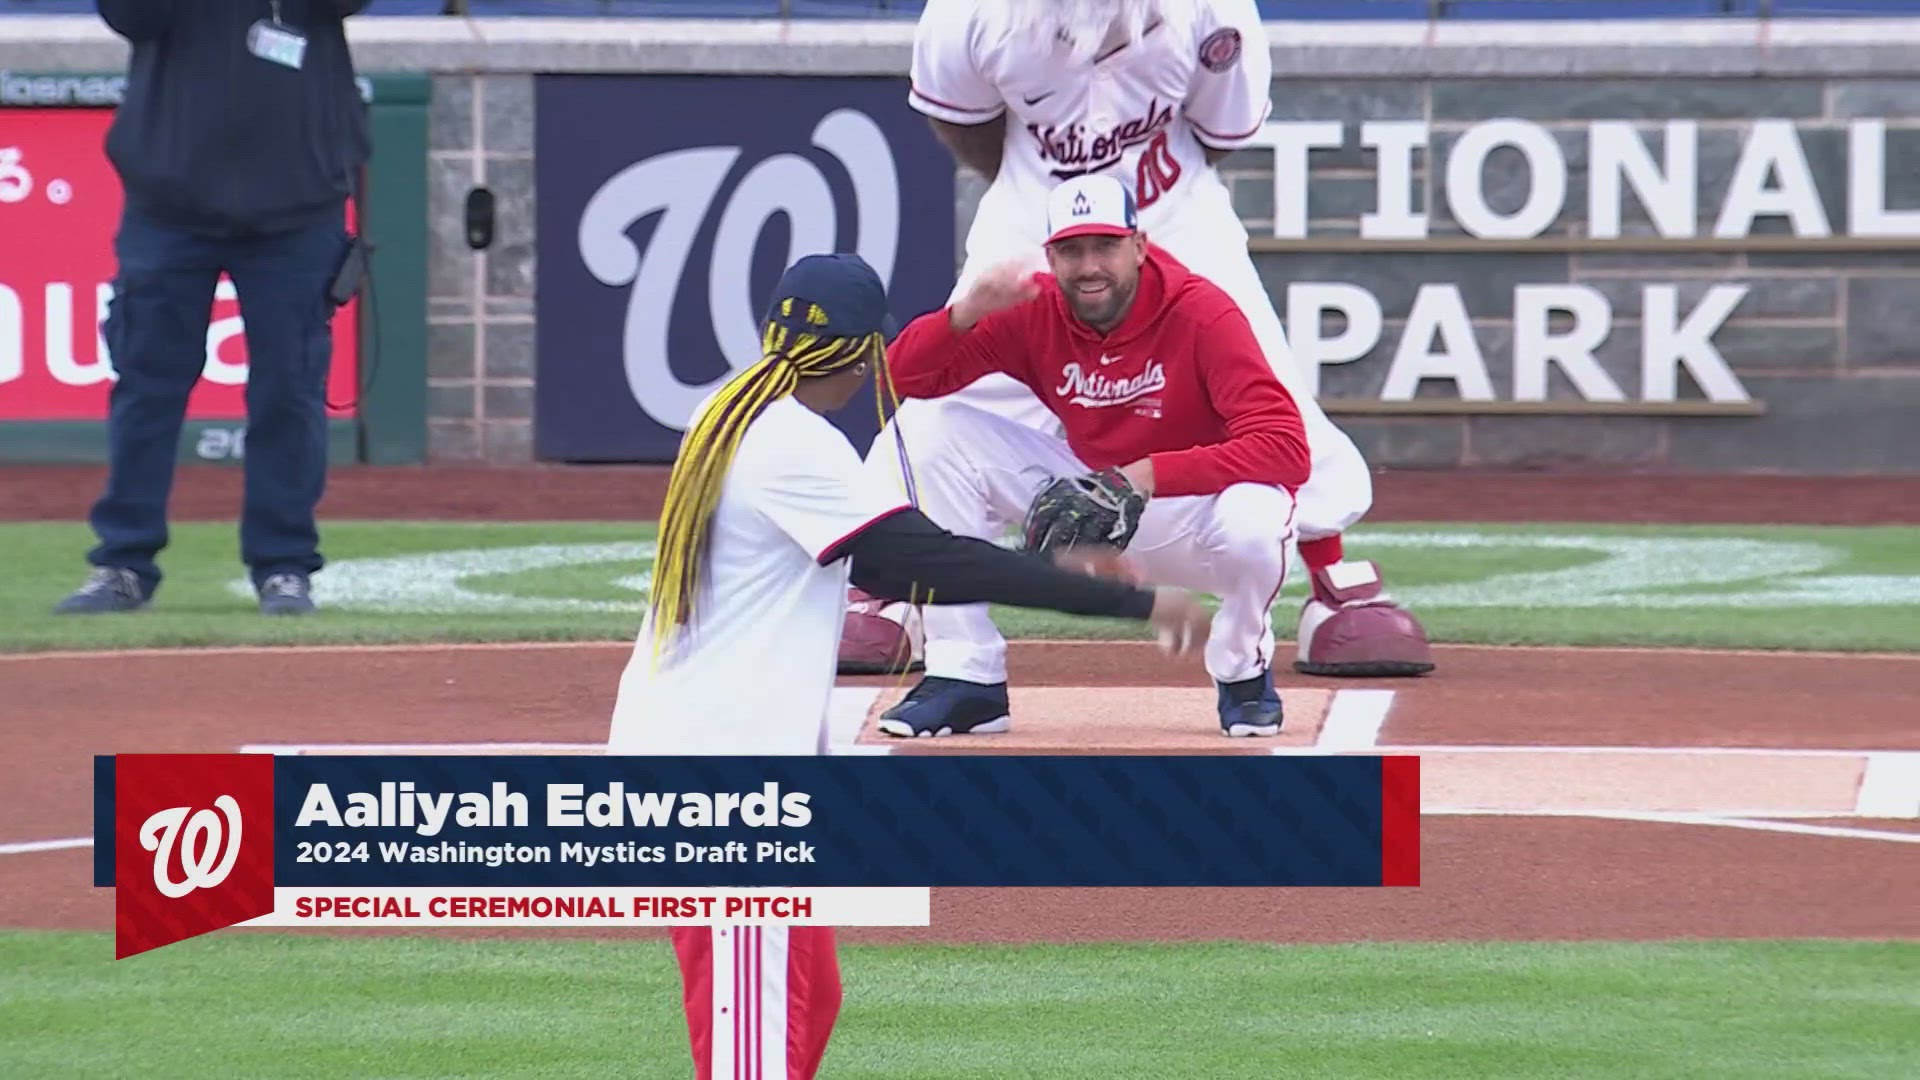 The Mystics selected her as the 6th overall pick in the WNBA draft threw the first pitch at the Nats Park